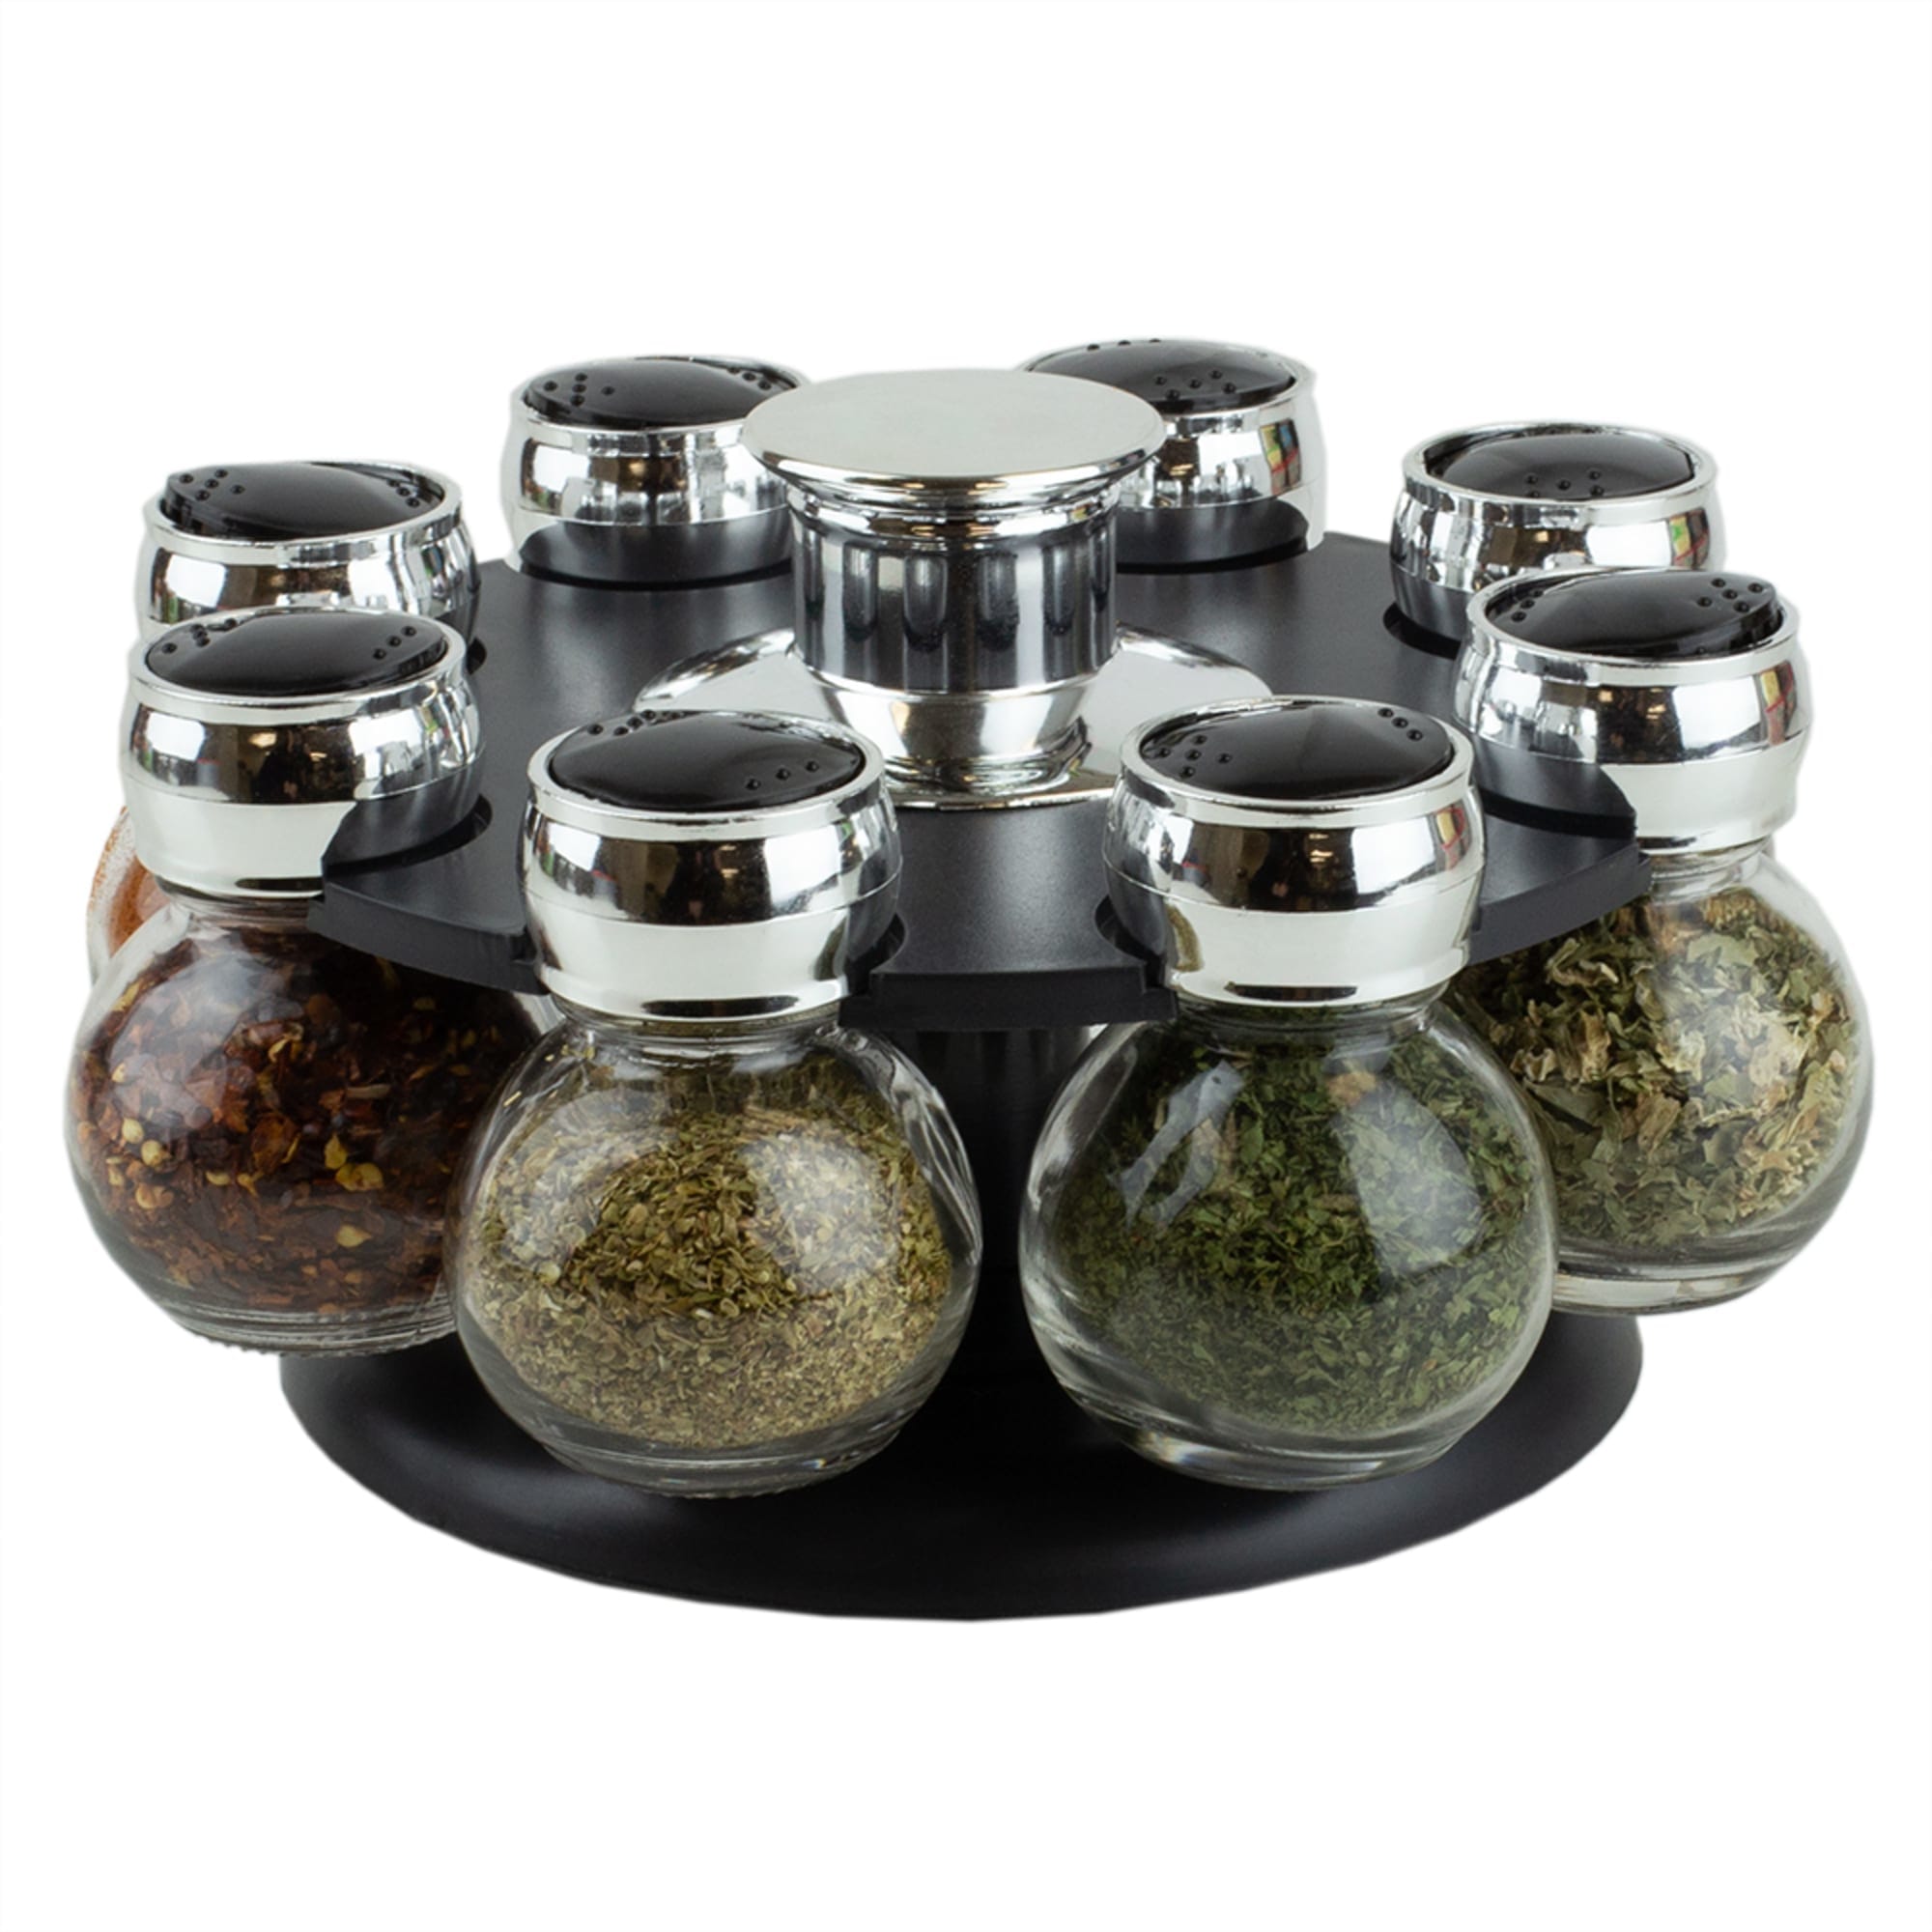 2 Tier Silver Metal Spice Rack Organizer with Glass Spice Container, Set of  6